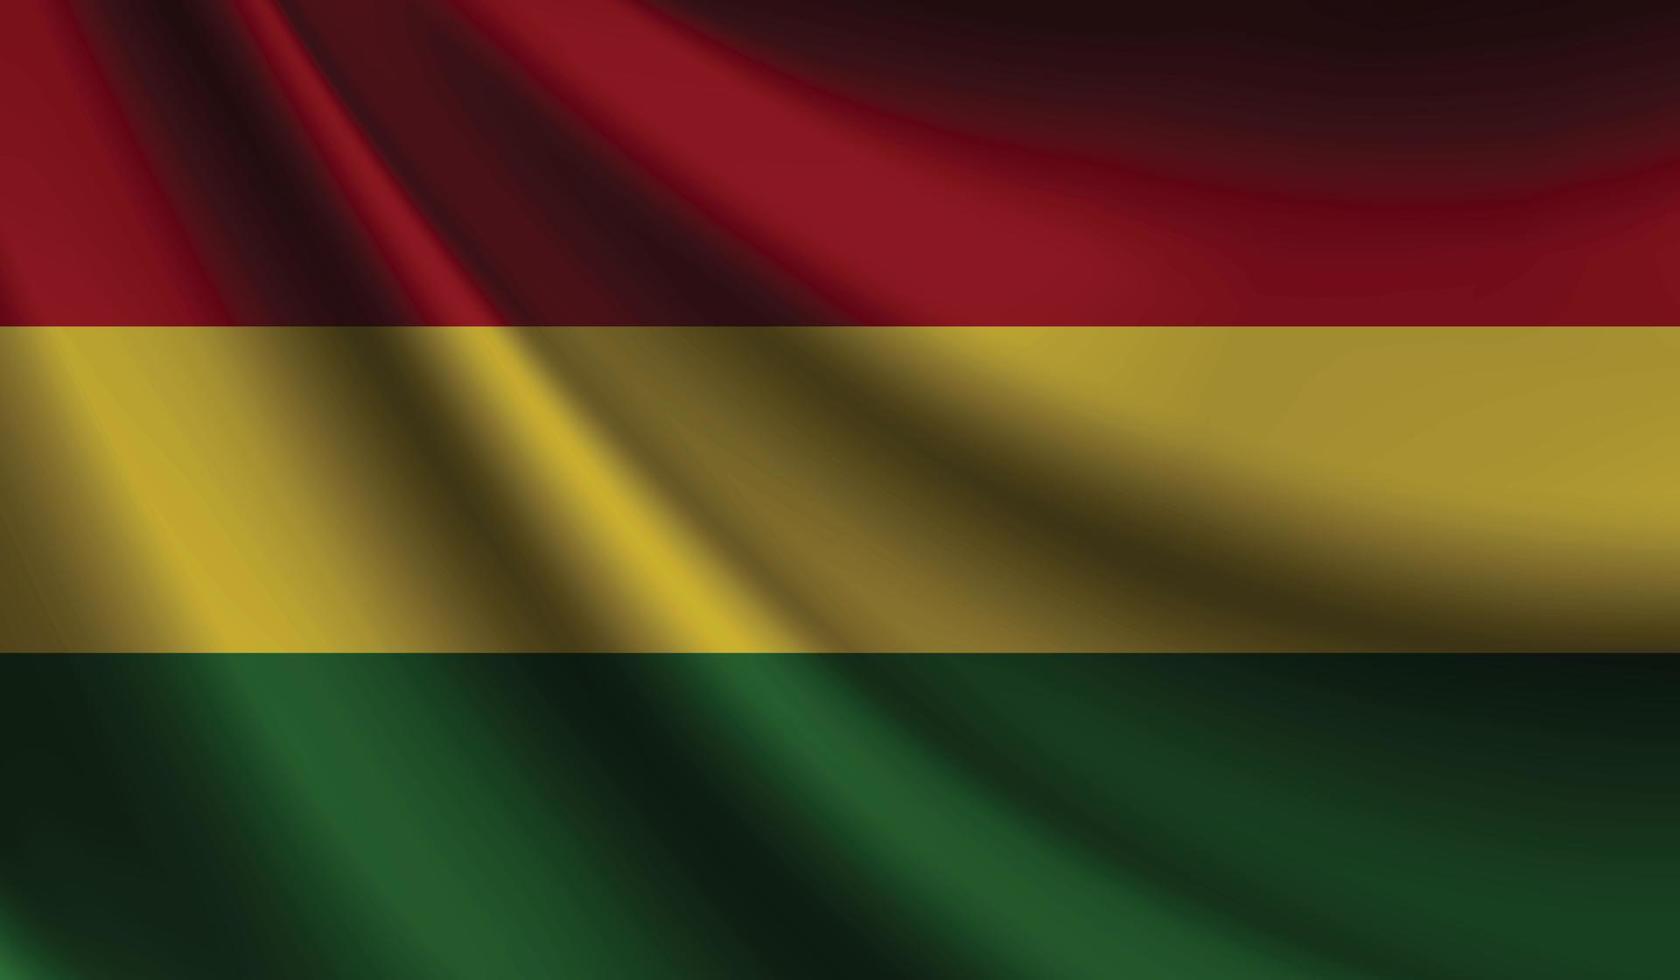 Bolivia flag waving Background for patriotic and national design vector